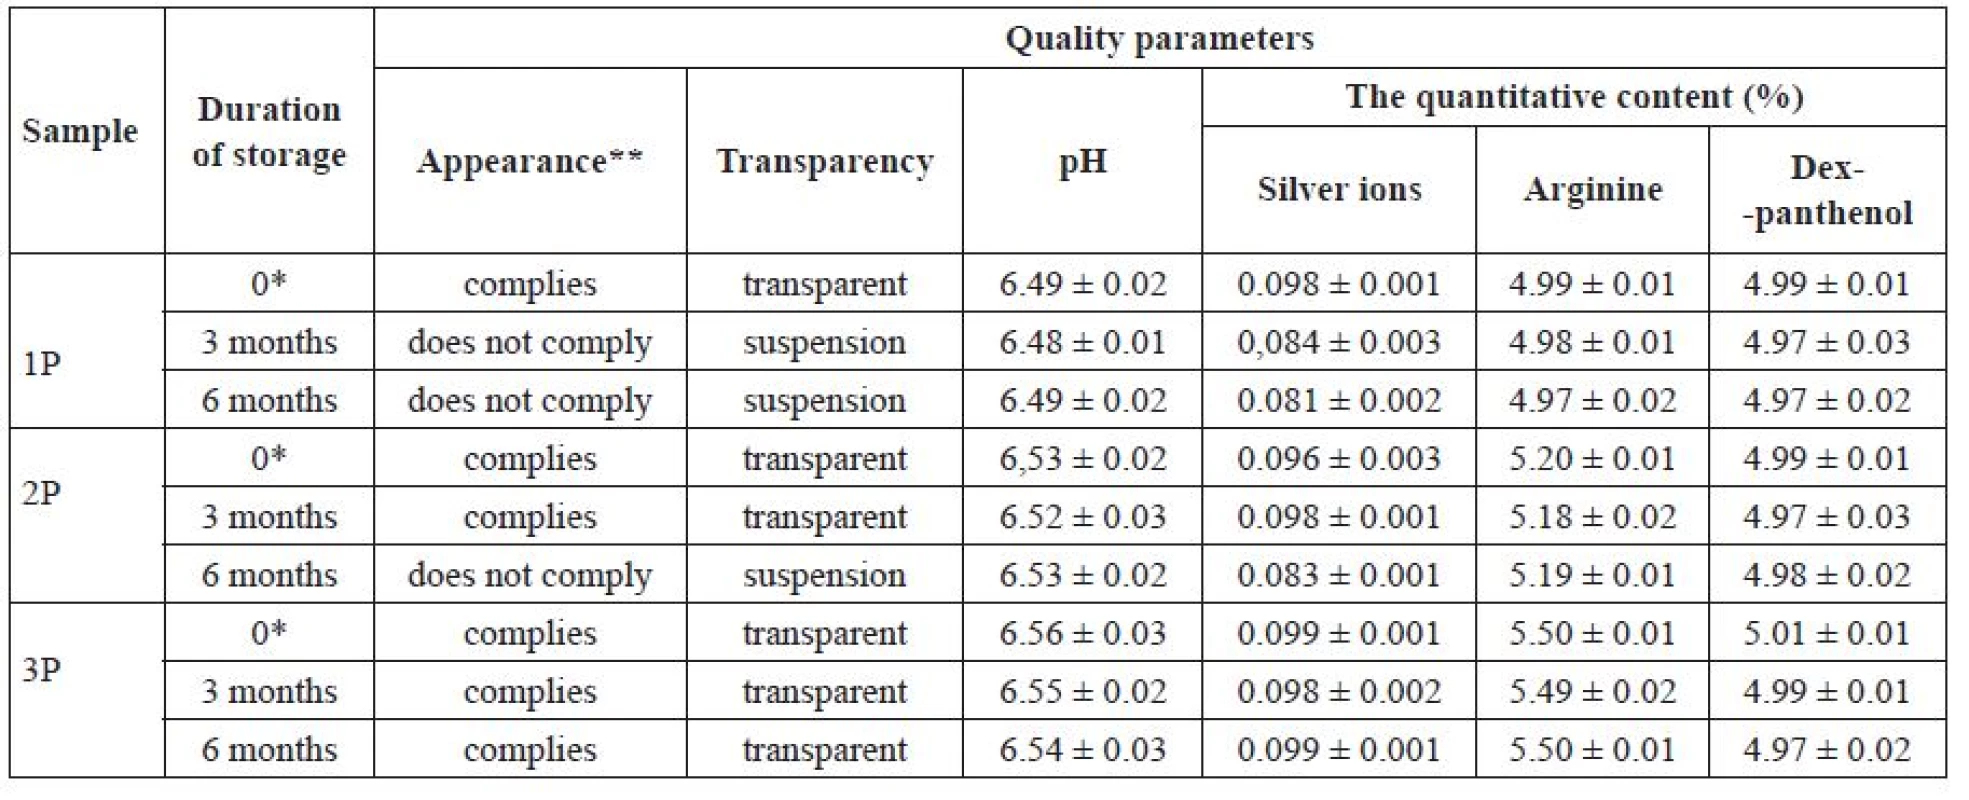 Dependence of the quality parameters of solutions on the amount of povidone during storage